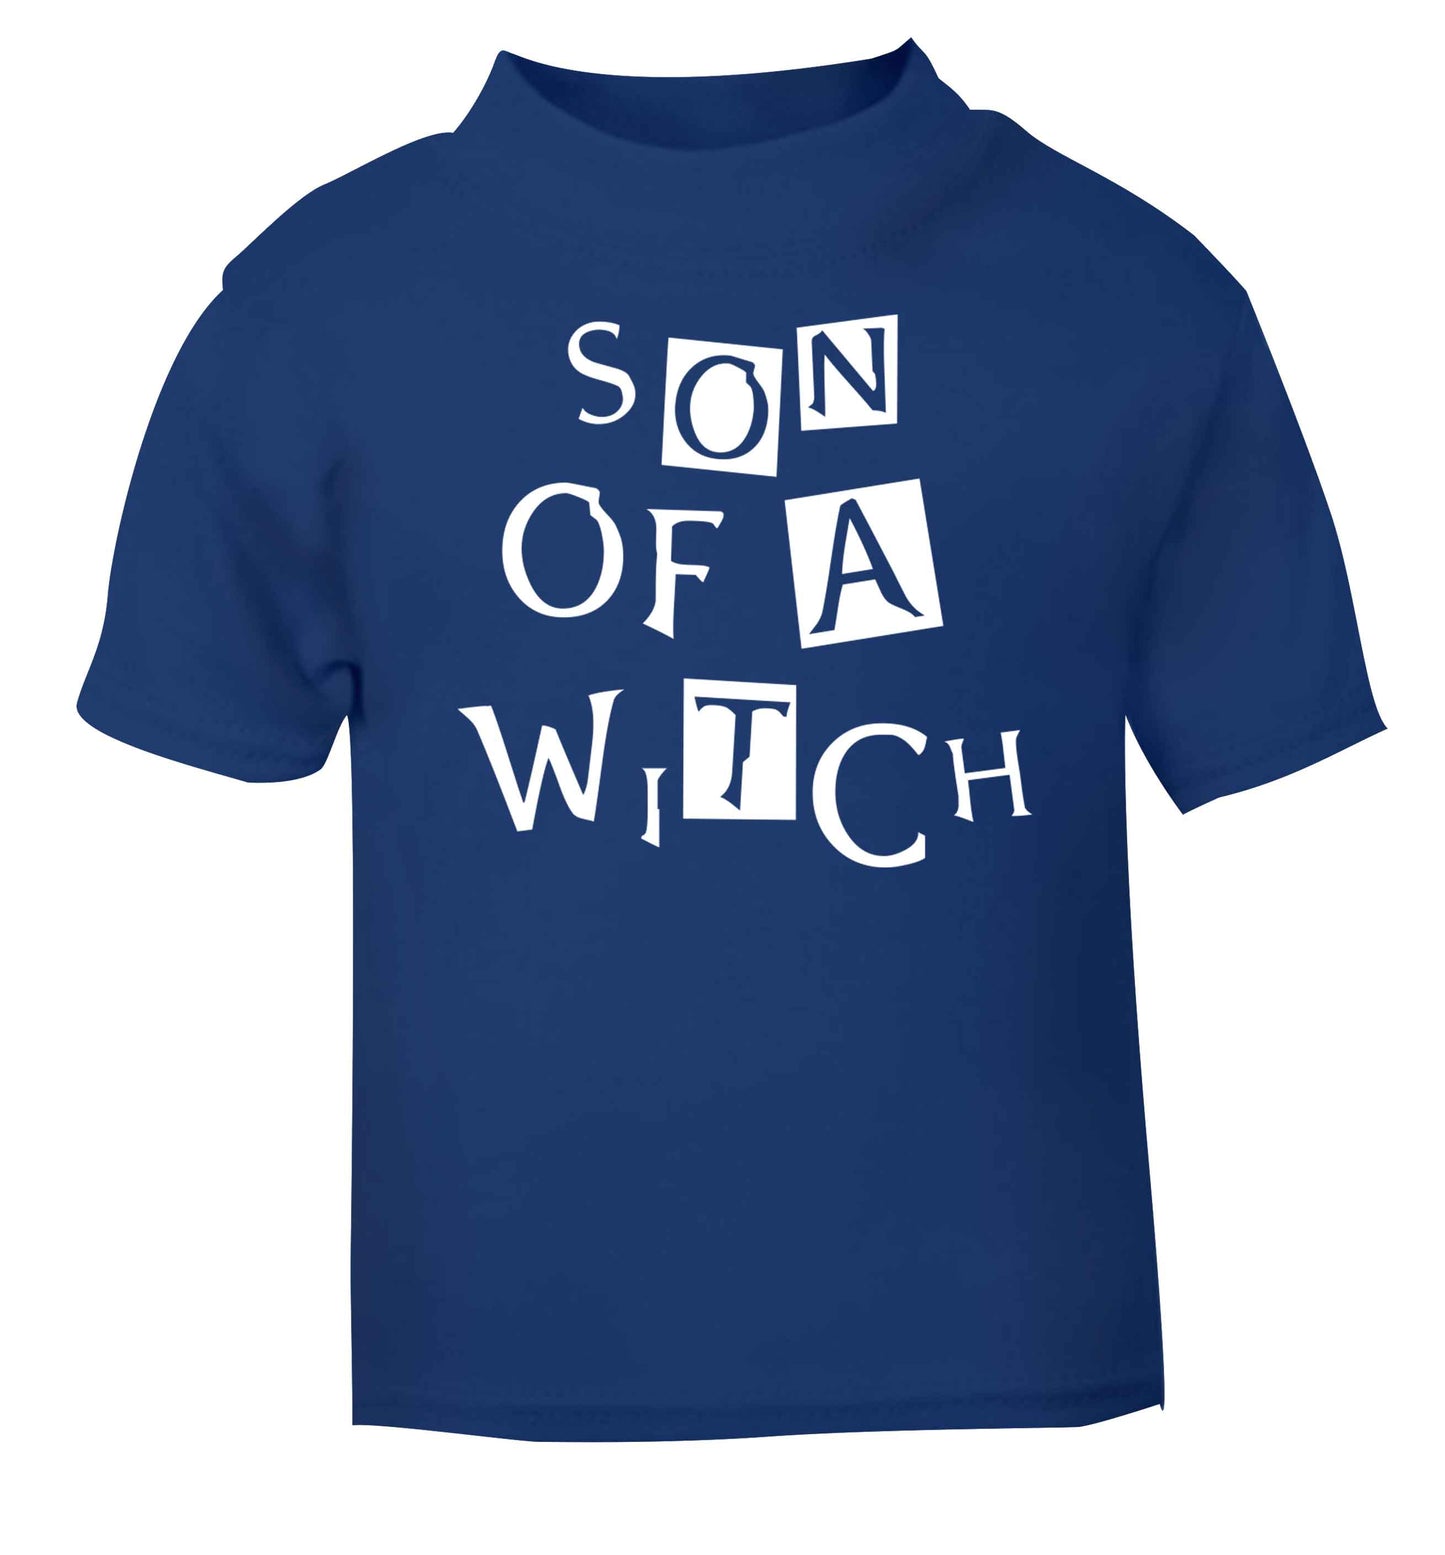 Son of a witch blue baby toddler Tshirt 2 Years